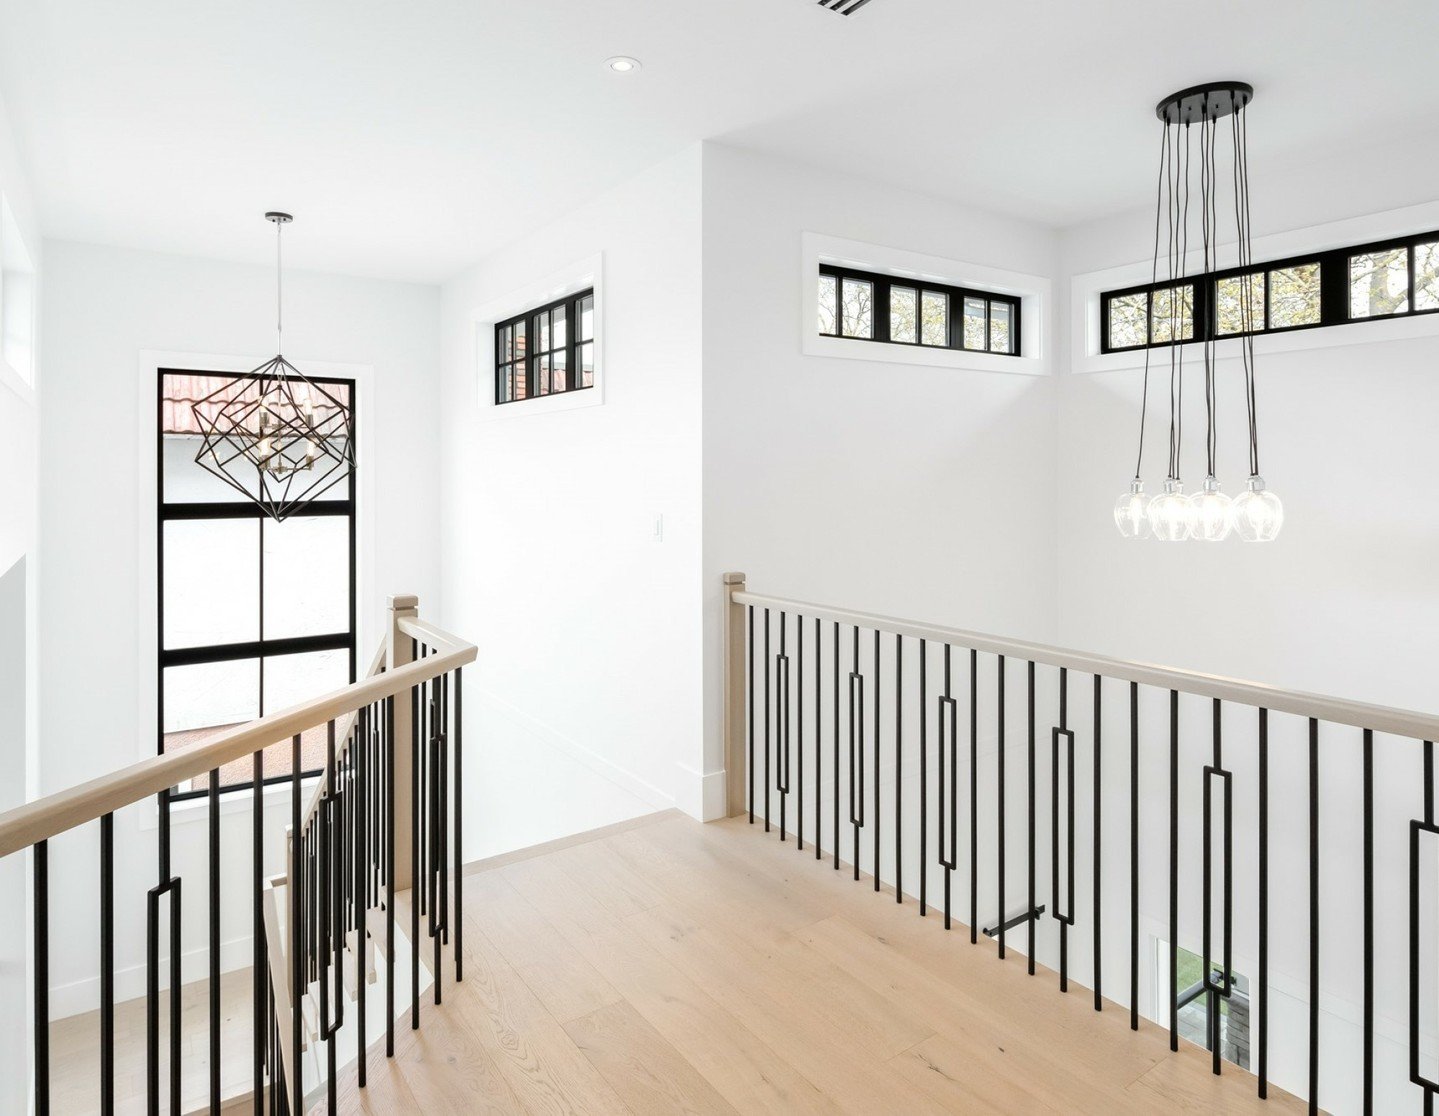 Step into transitional elegance: a bespoke residential project with KFA Homes. 

Striking black railings, bright white walls and wood floors are accentuated by feature pendants and framed by sunlit windows 🪟☀️
.
.
.
.
.
.
#interiordesign #design #st